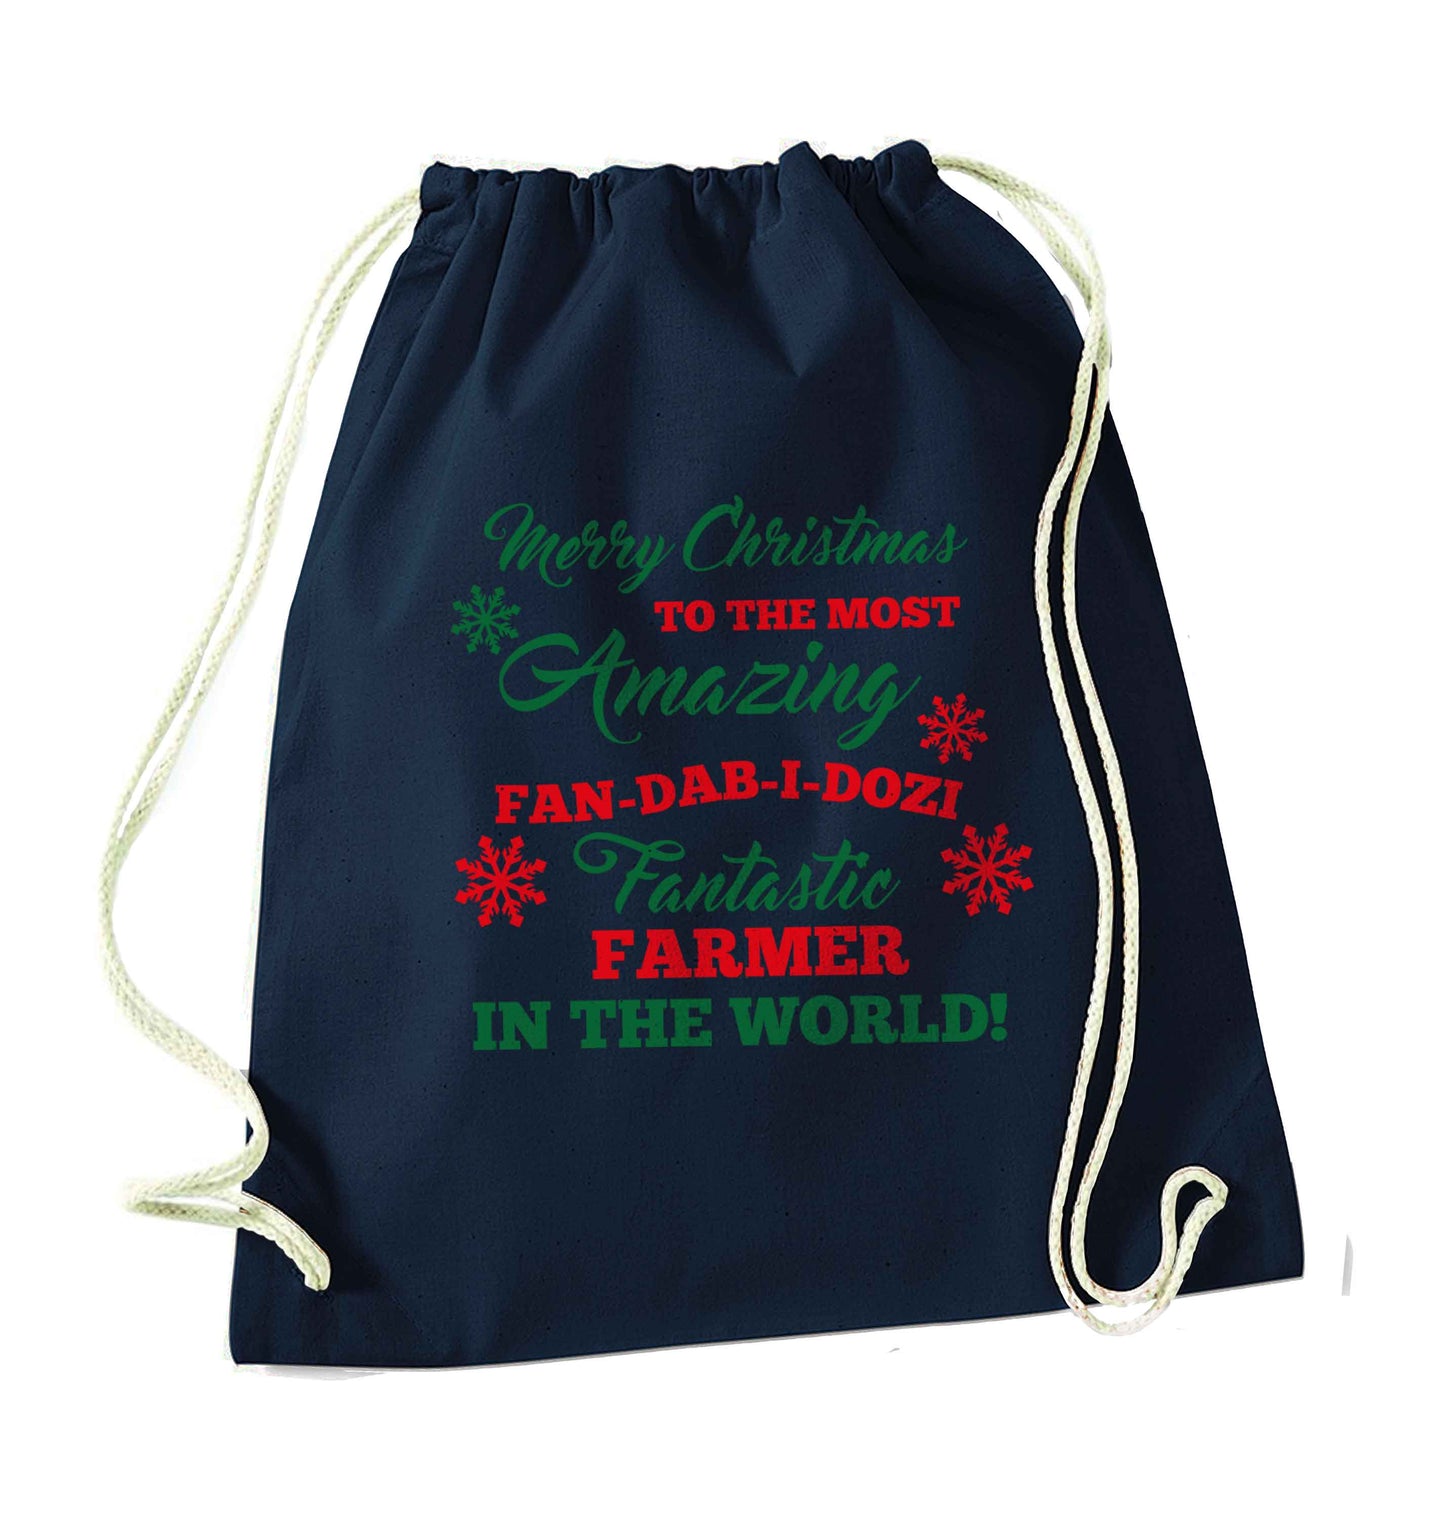 Merry Christmas to the most amazing farmer in the world! navy drawstring bag